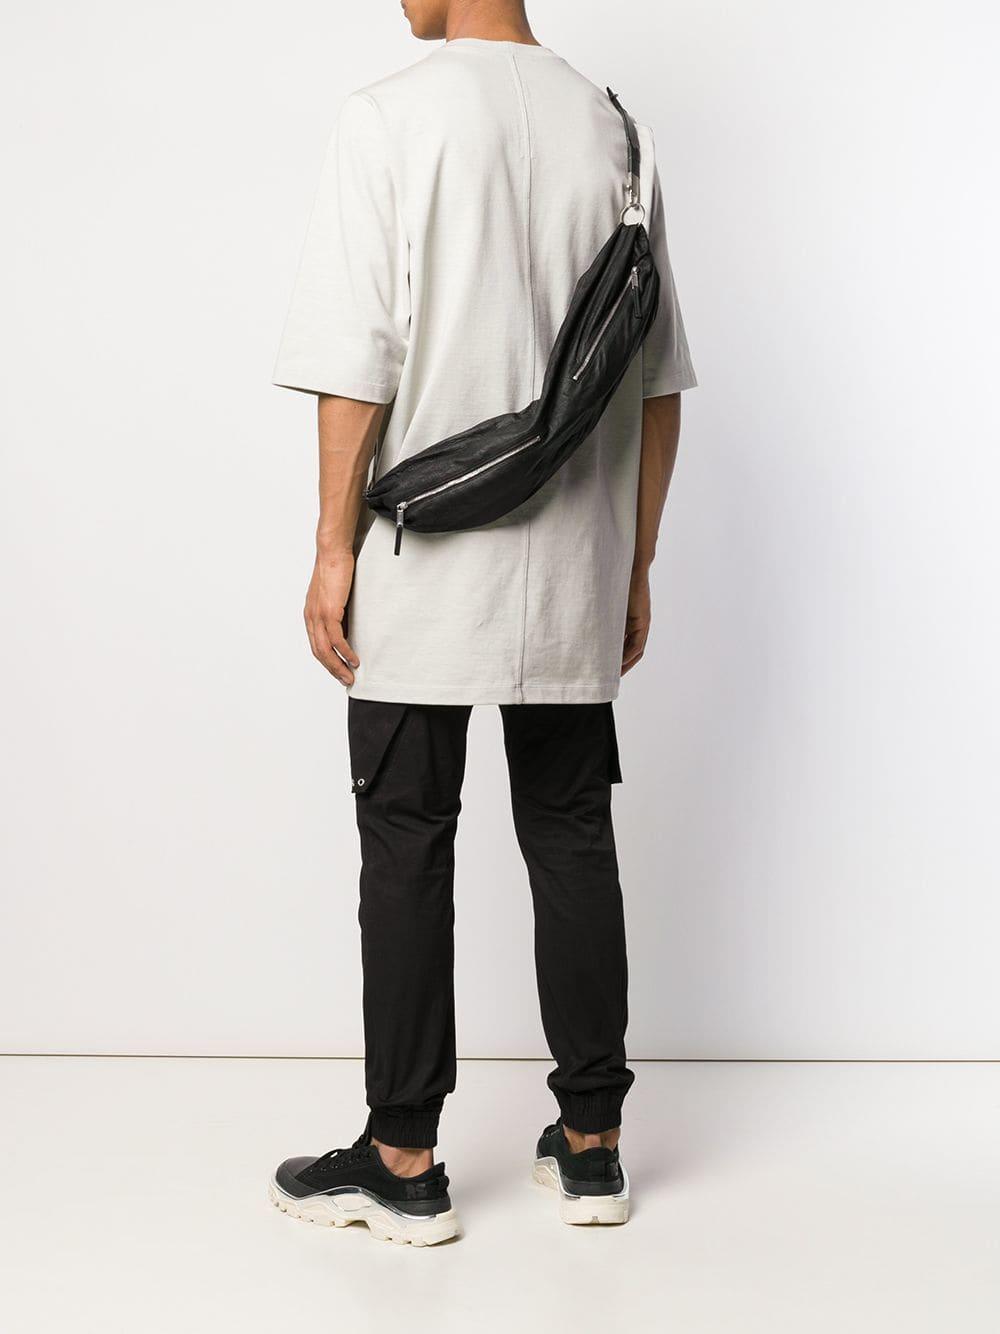 Sash bag? Looks super comfortable but not stylish or elegant at all. I can  see how it would be very useful, but it seems kind of grandma. Thoughts?  Anyone have one? :